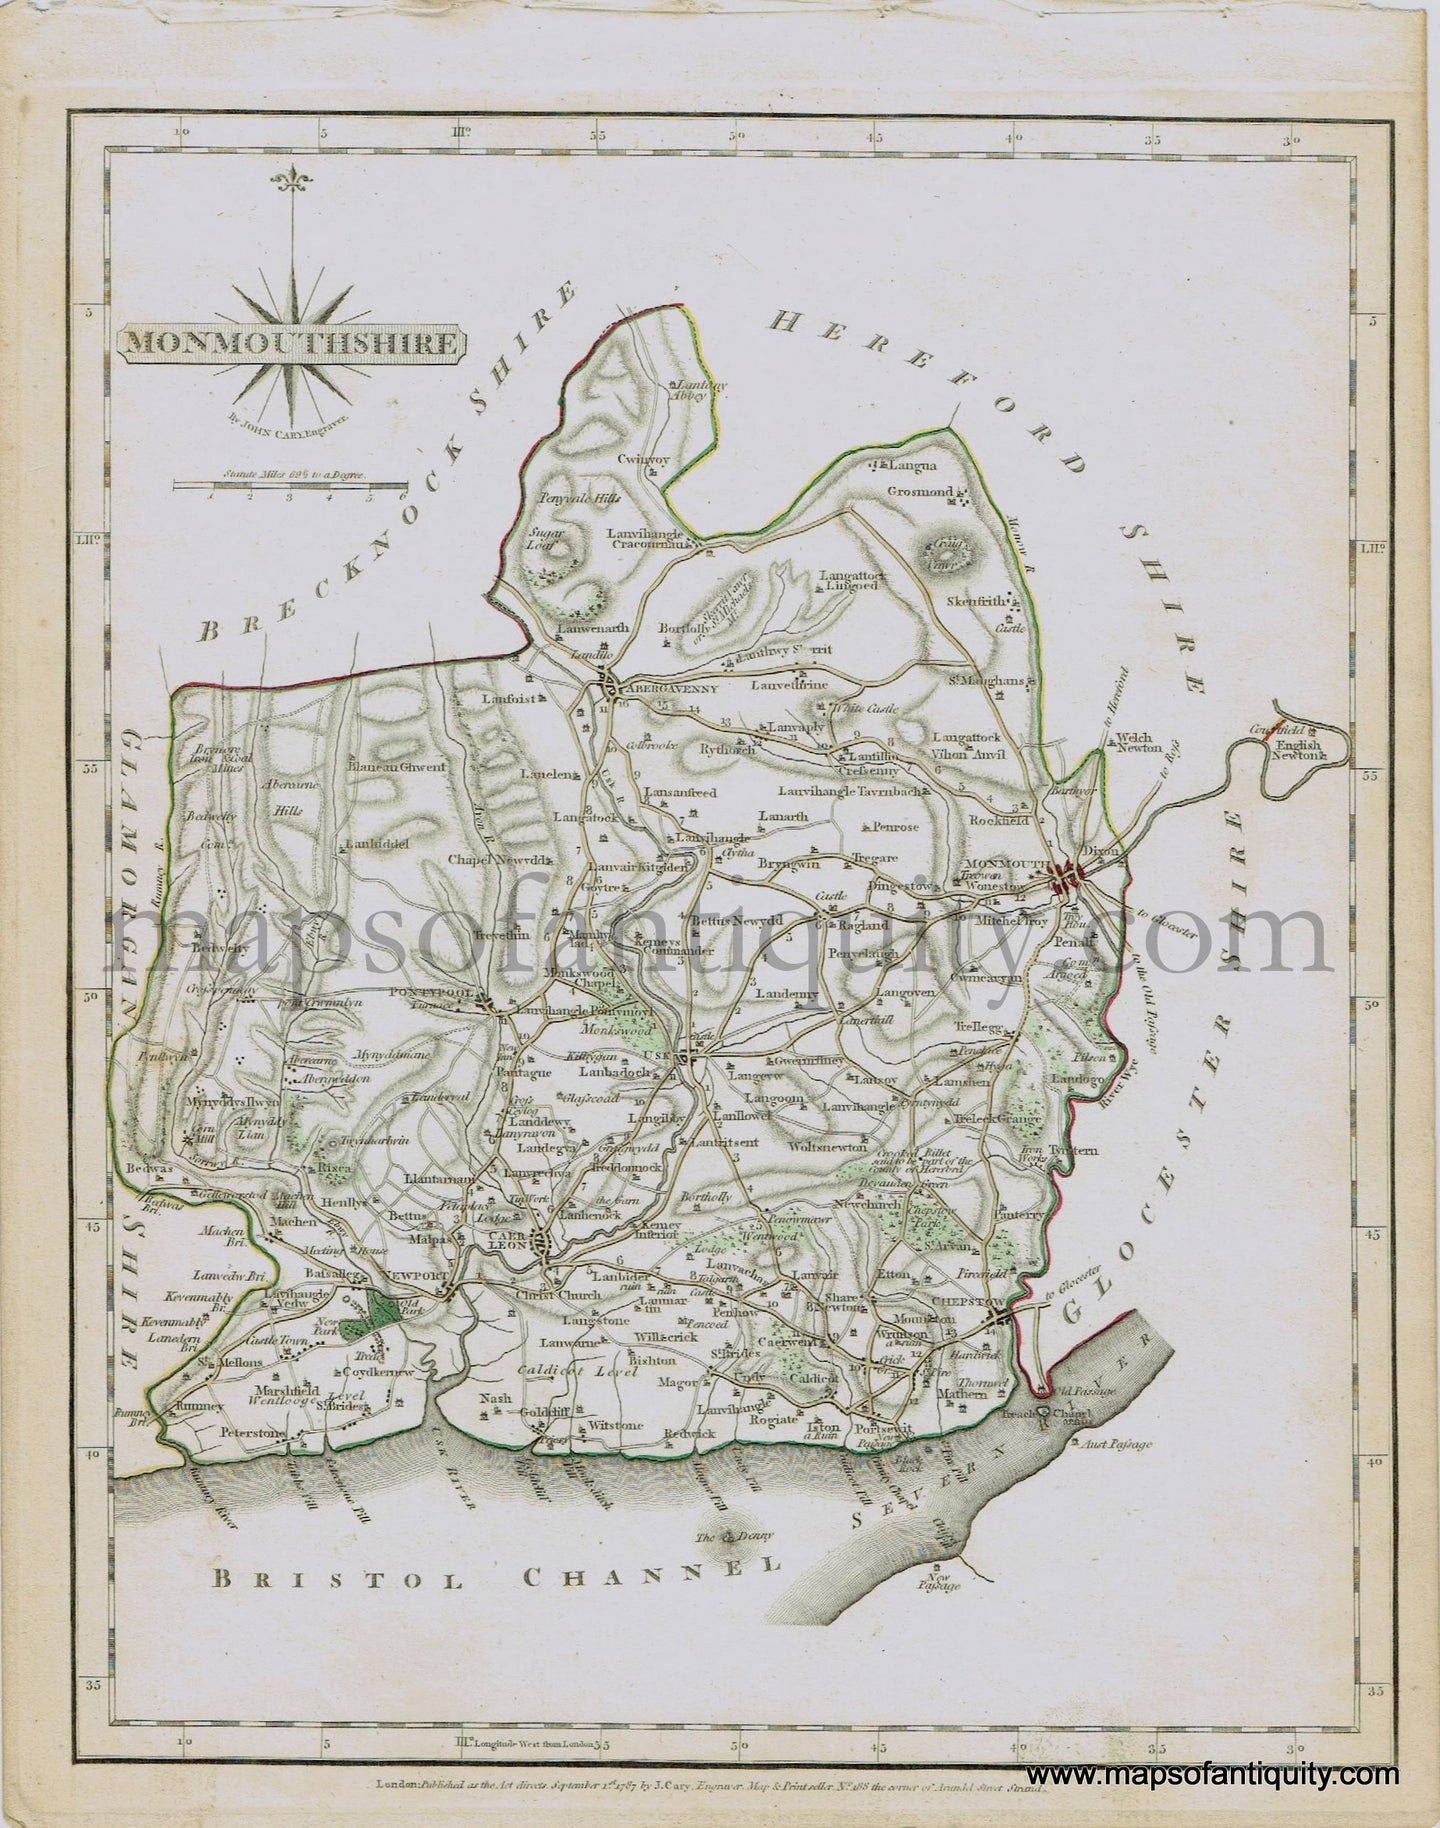 Antique-Hand-Colored-Map-Monmouthshire-1787-John-Cary-England--1700s-18th-century-Maps-of-Antiquity